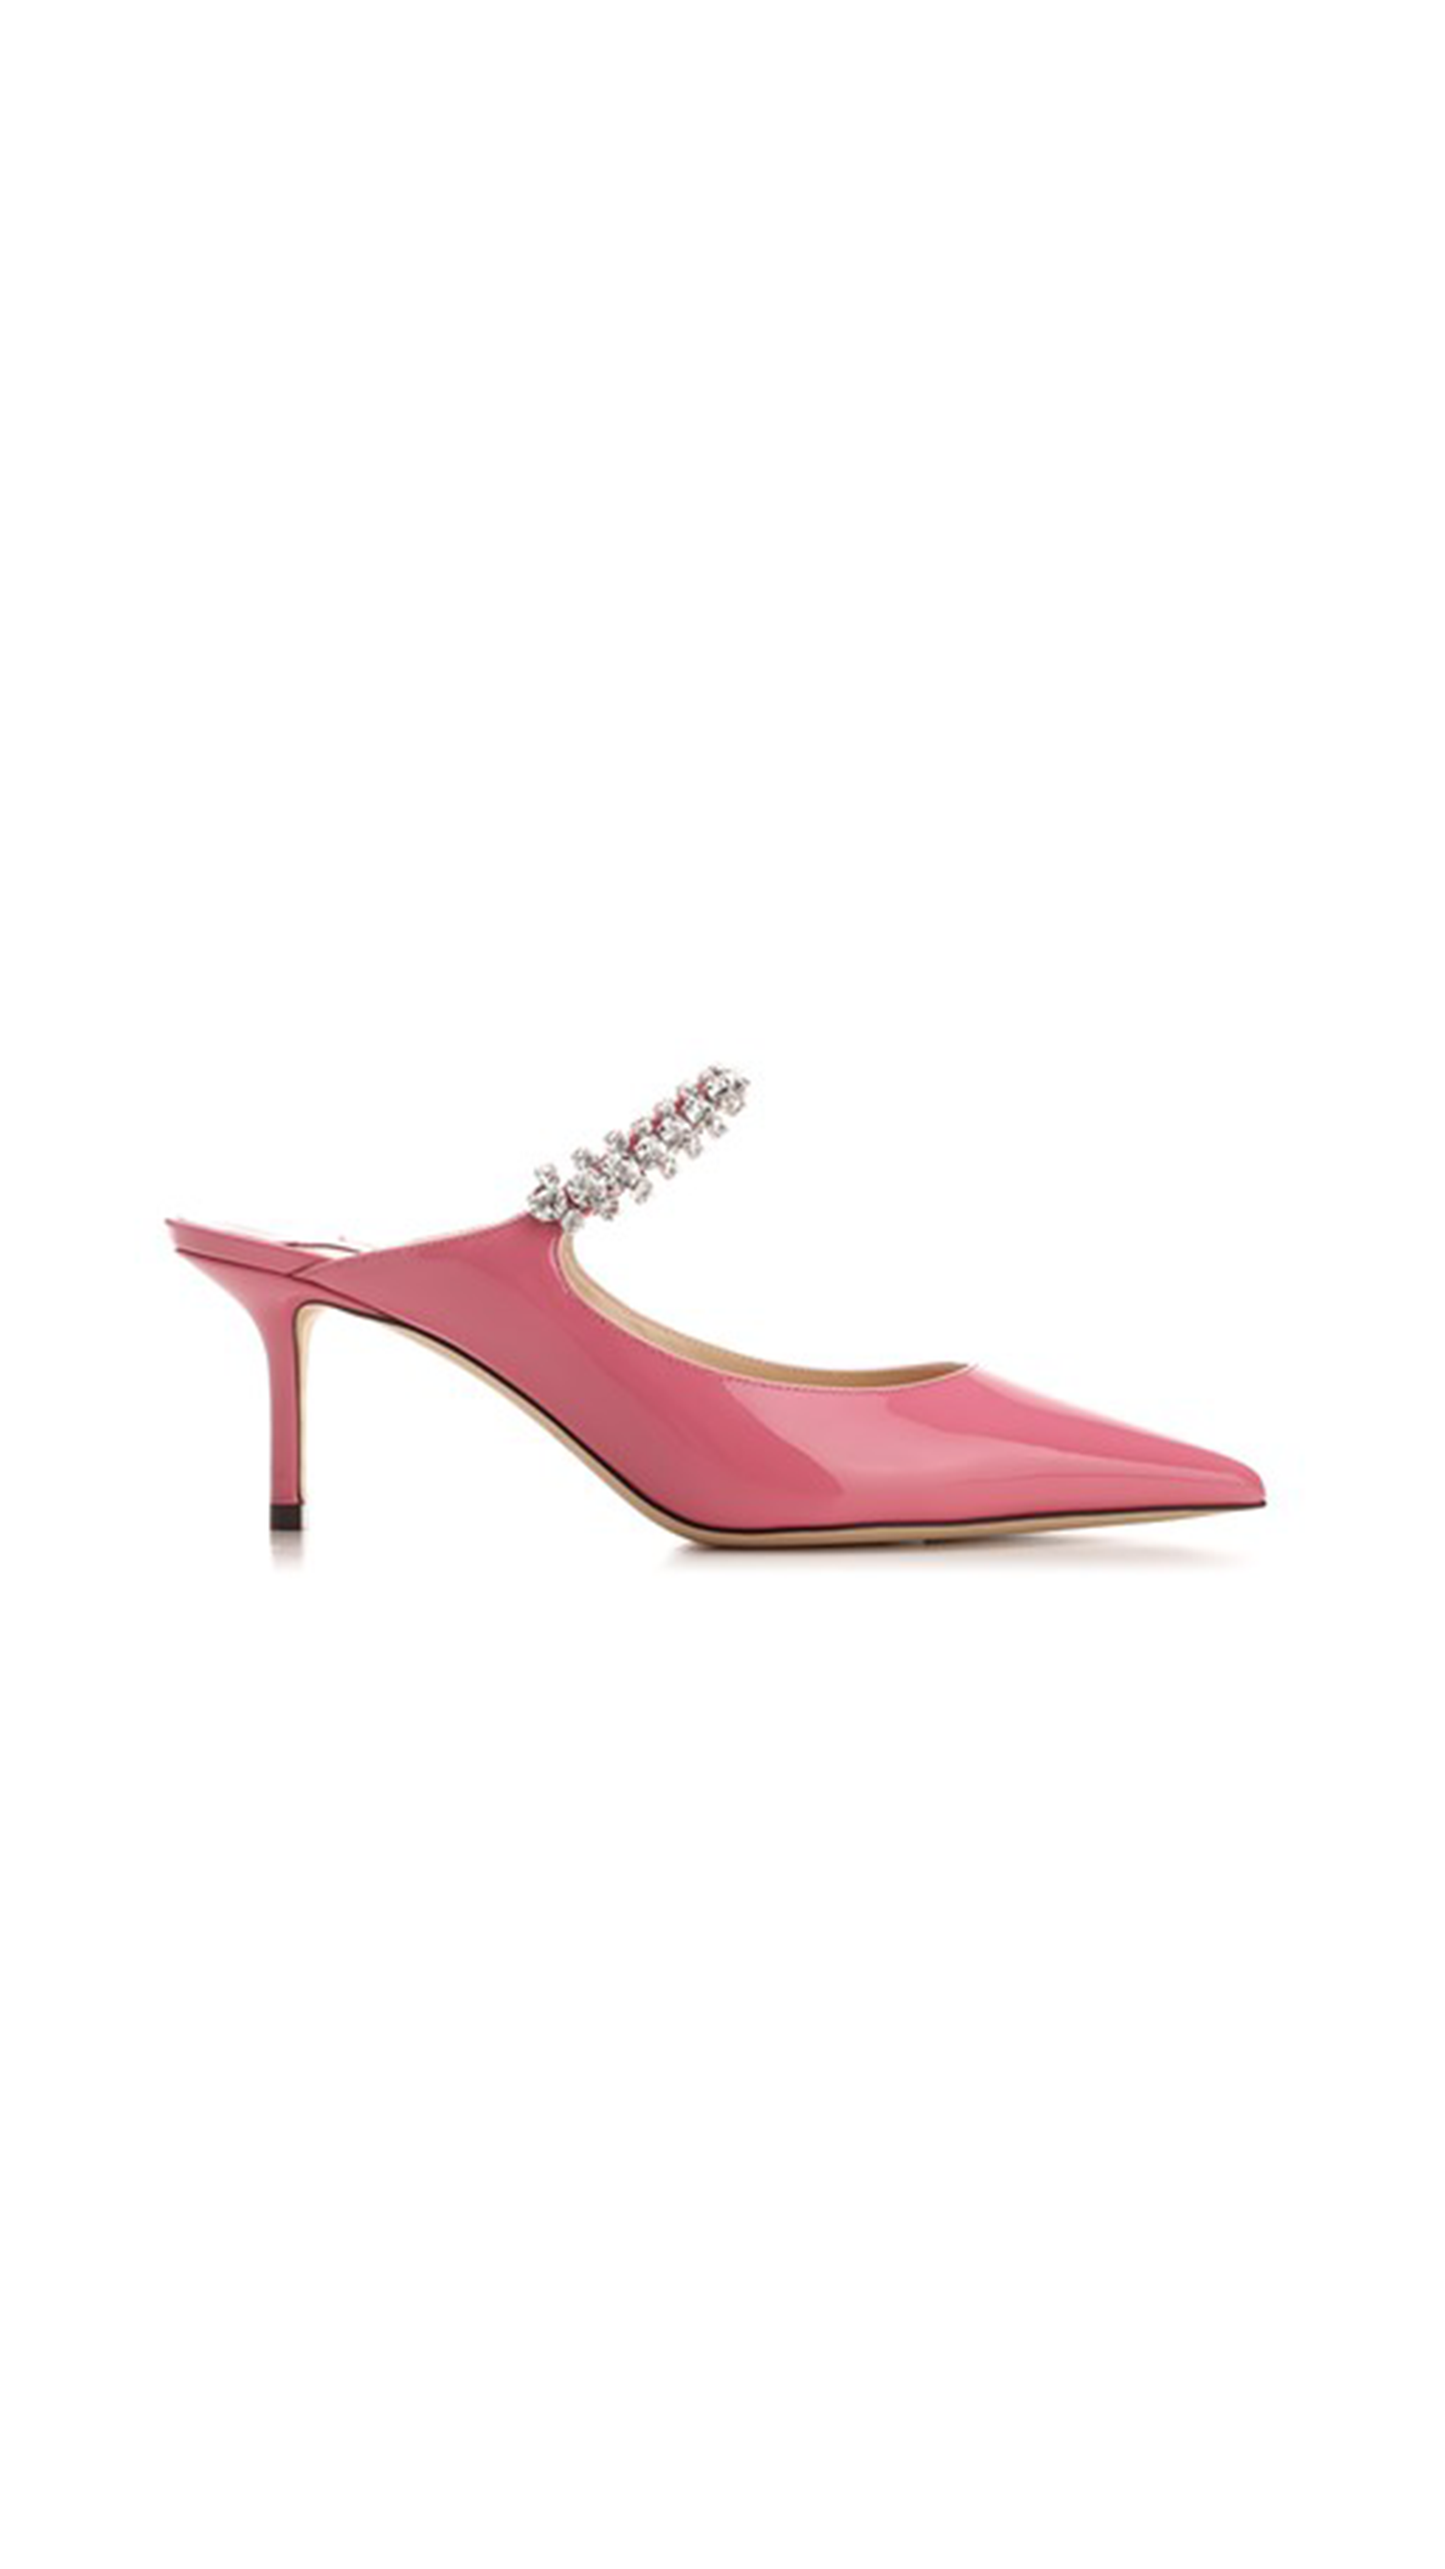 Bing 65 Patent Leather Mules - Candy Pink